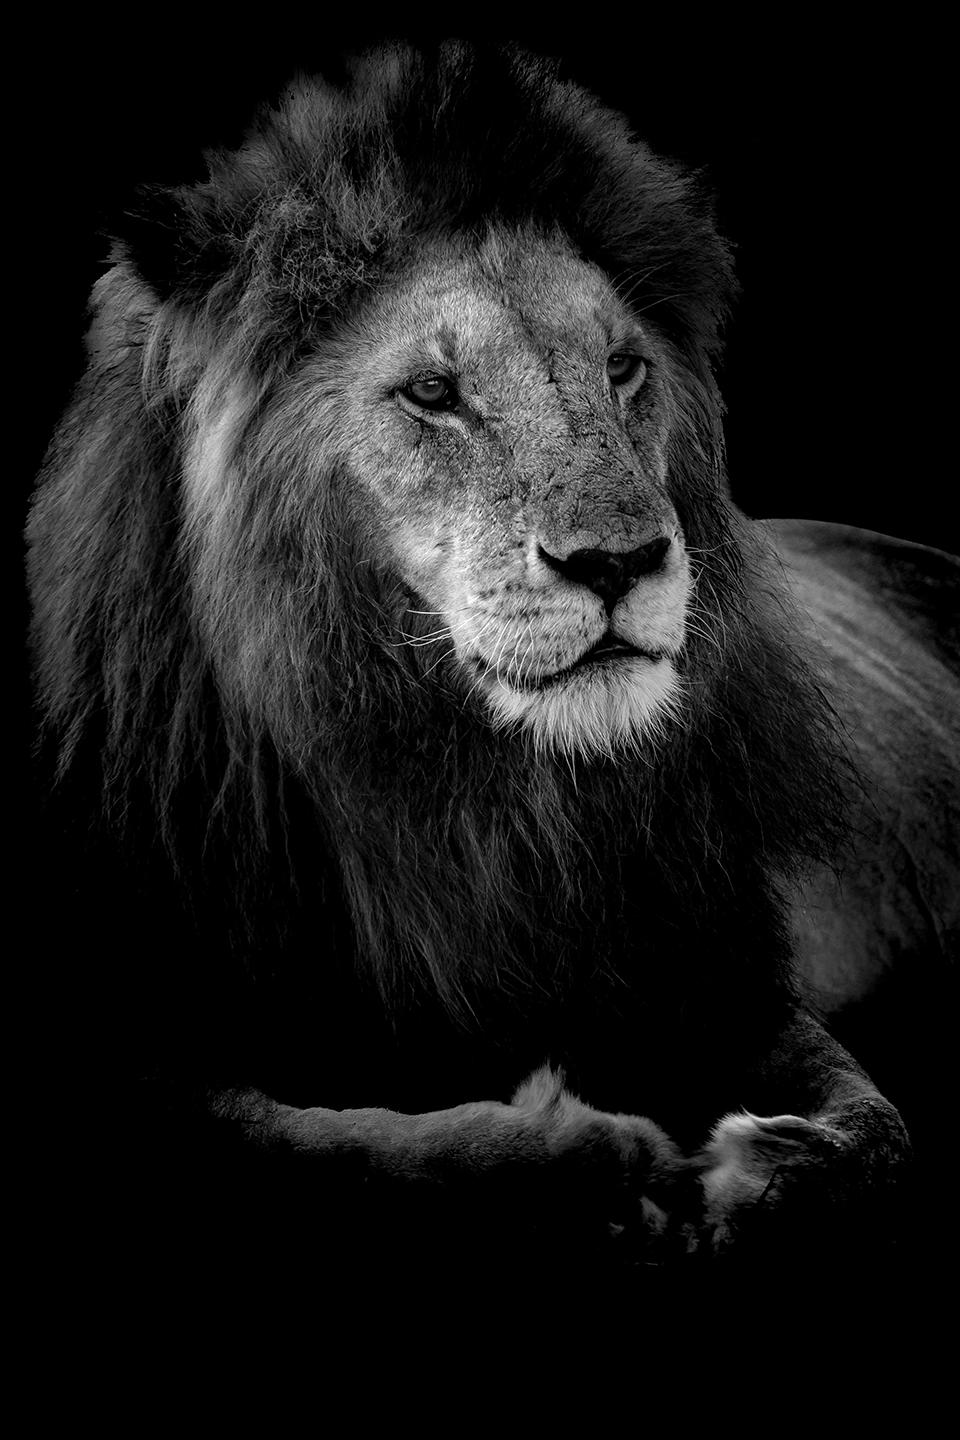 Portrait photograph of the “King of Beasts.”  

New York City based wildlife and street photographer Viet Chu captured this striking shot of a lion on a dark background. His focus is to inspire us with the lion’s strength and grace. It was shot in